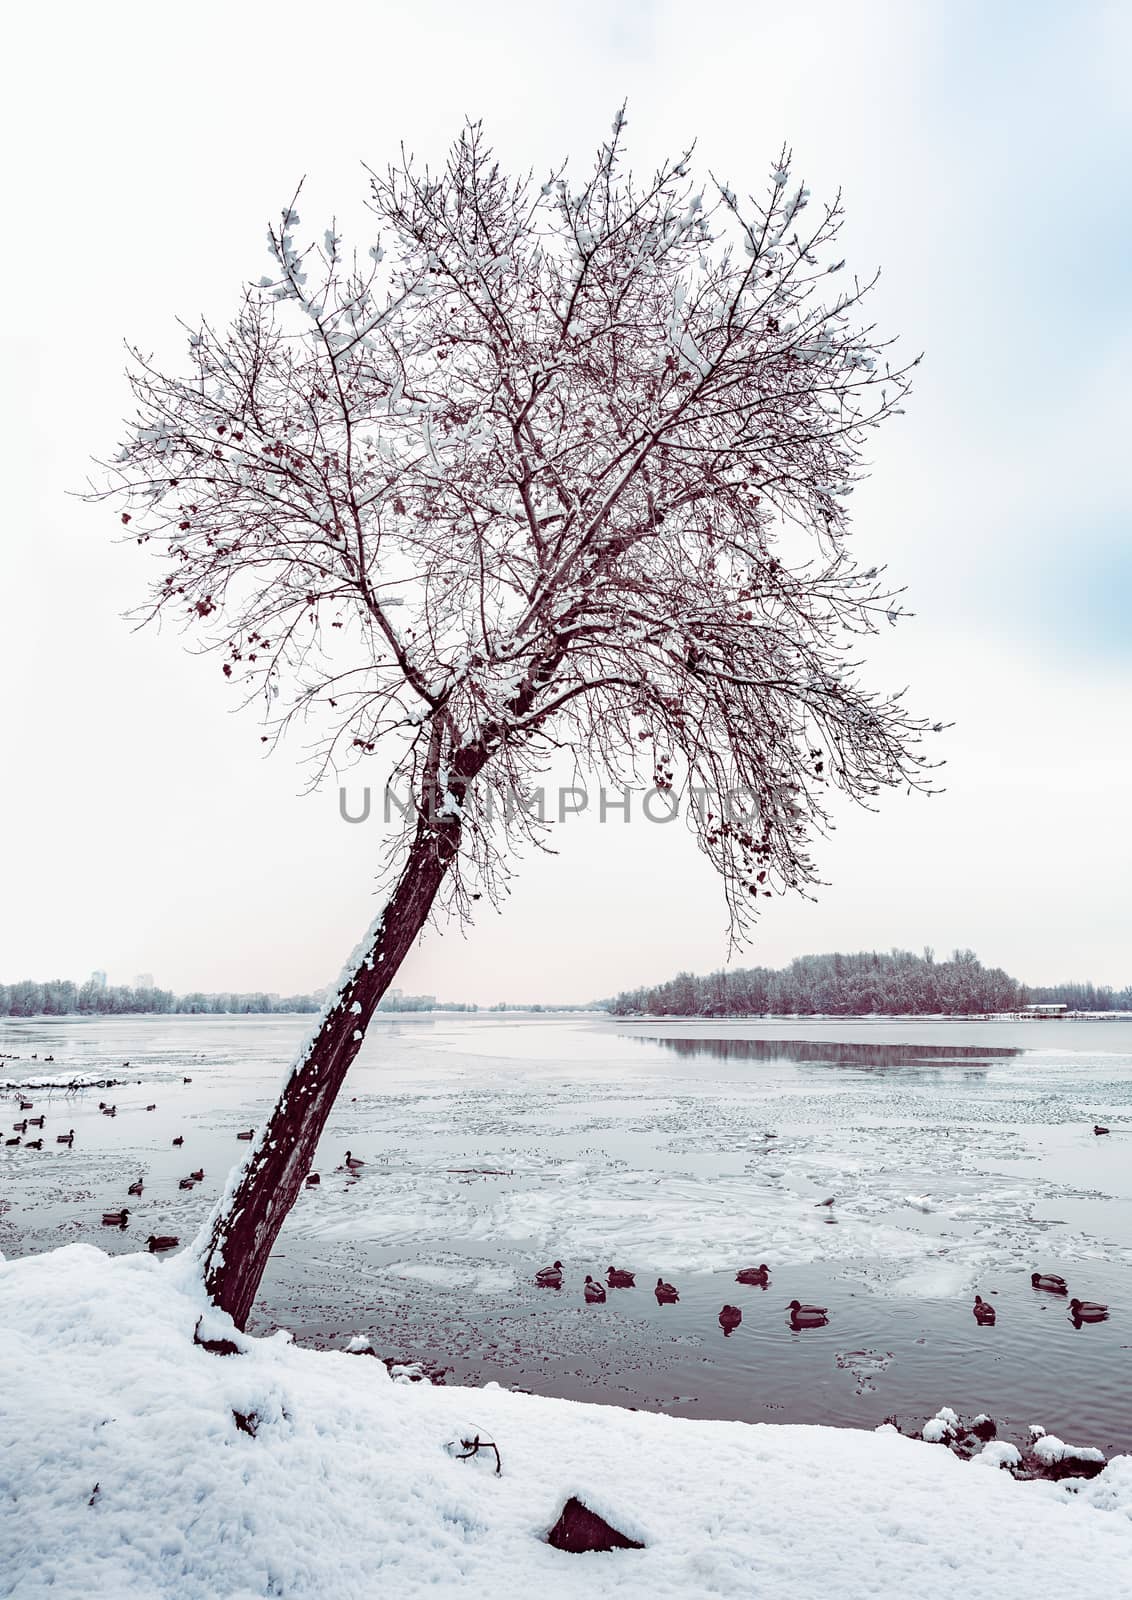 A poplar close to the Dnieper river in Kiev, Ukraine, stands out against a background of white snowy winter sky. Ducks are swimming on the icy water